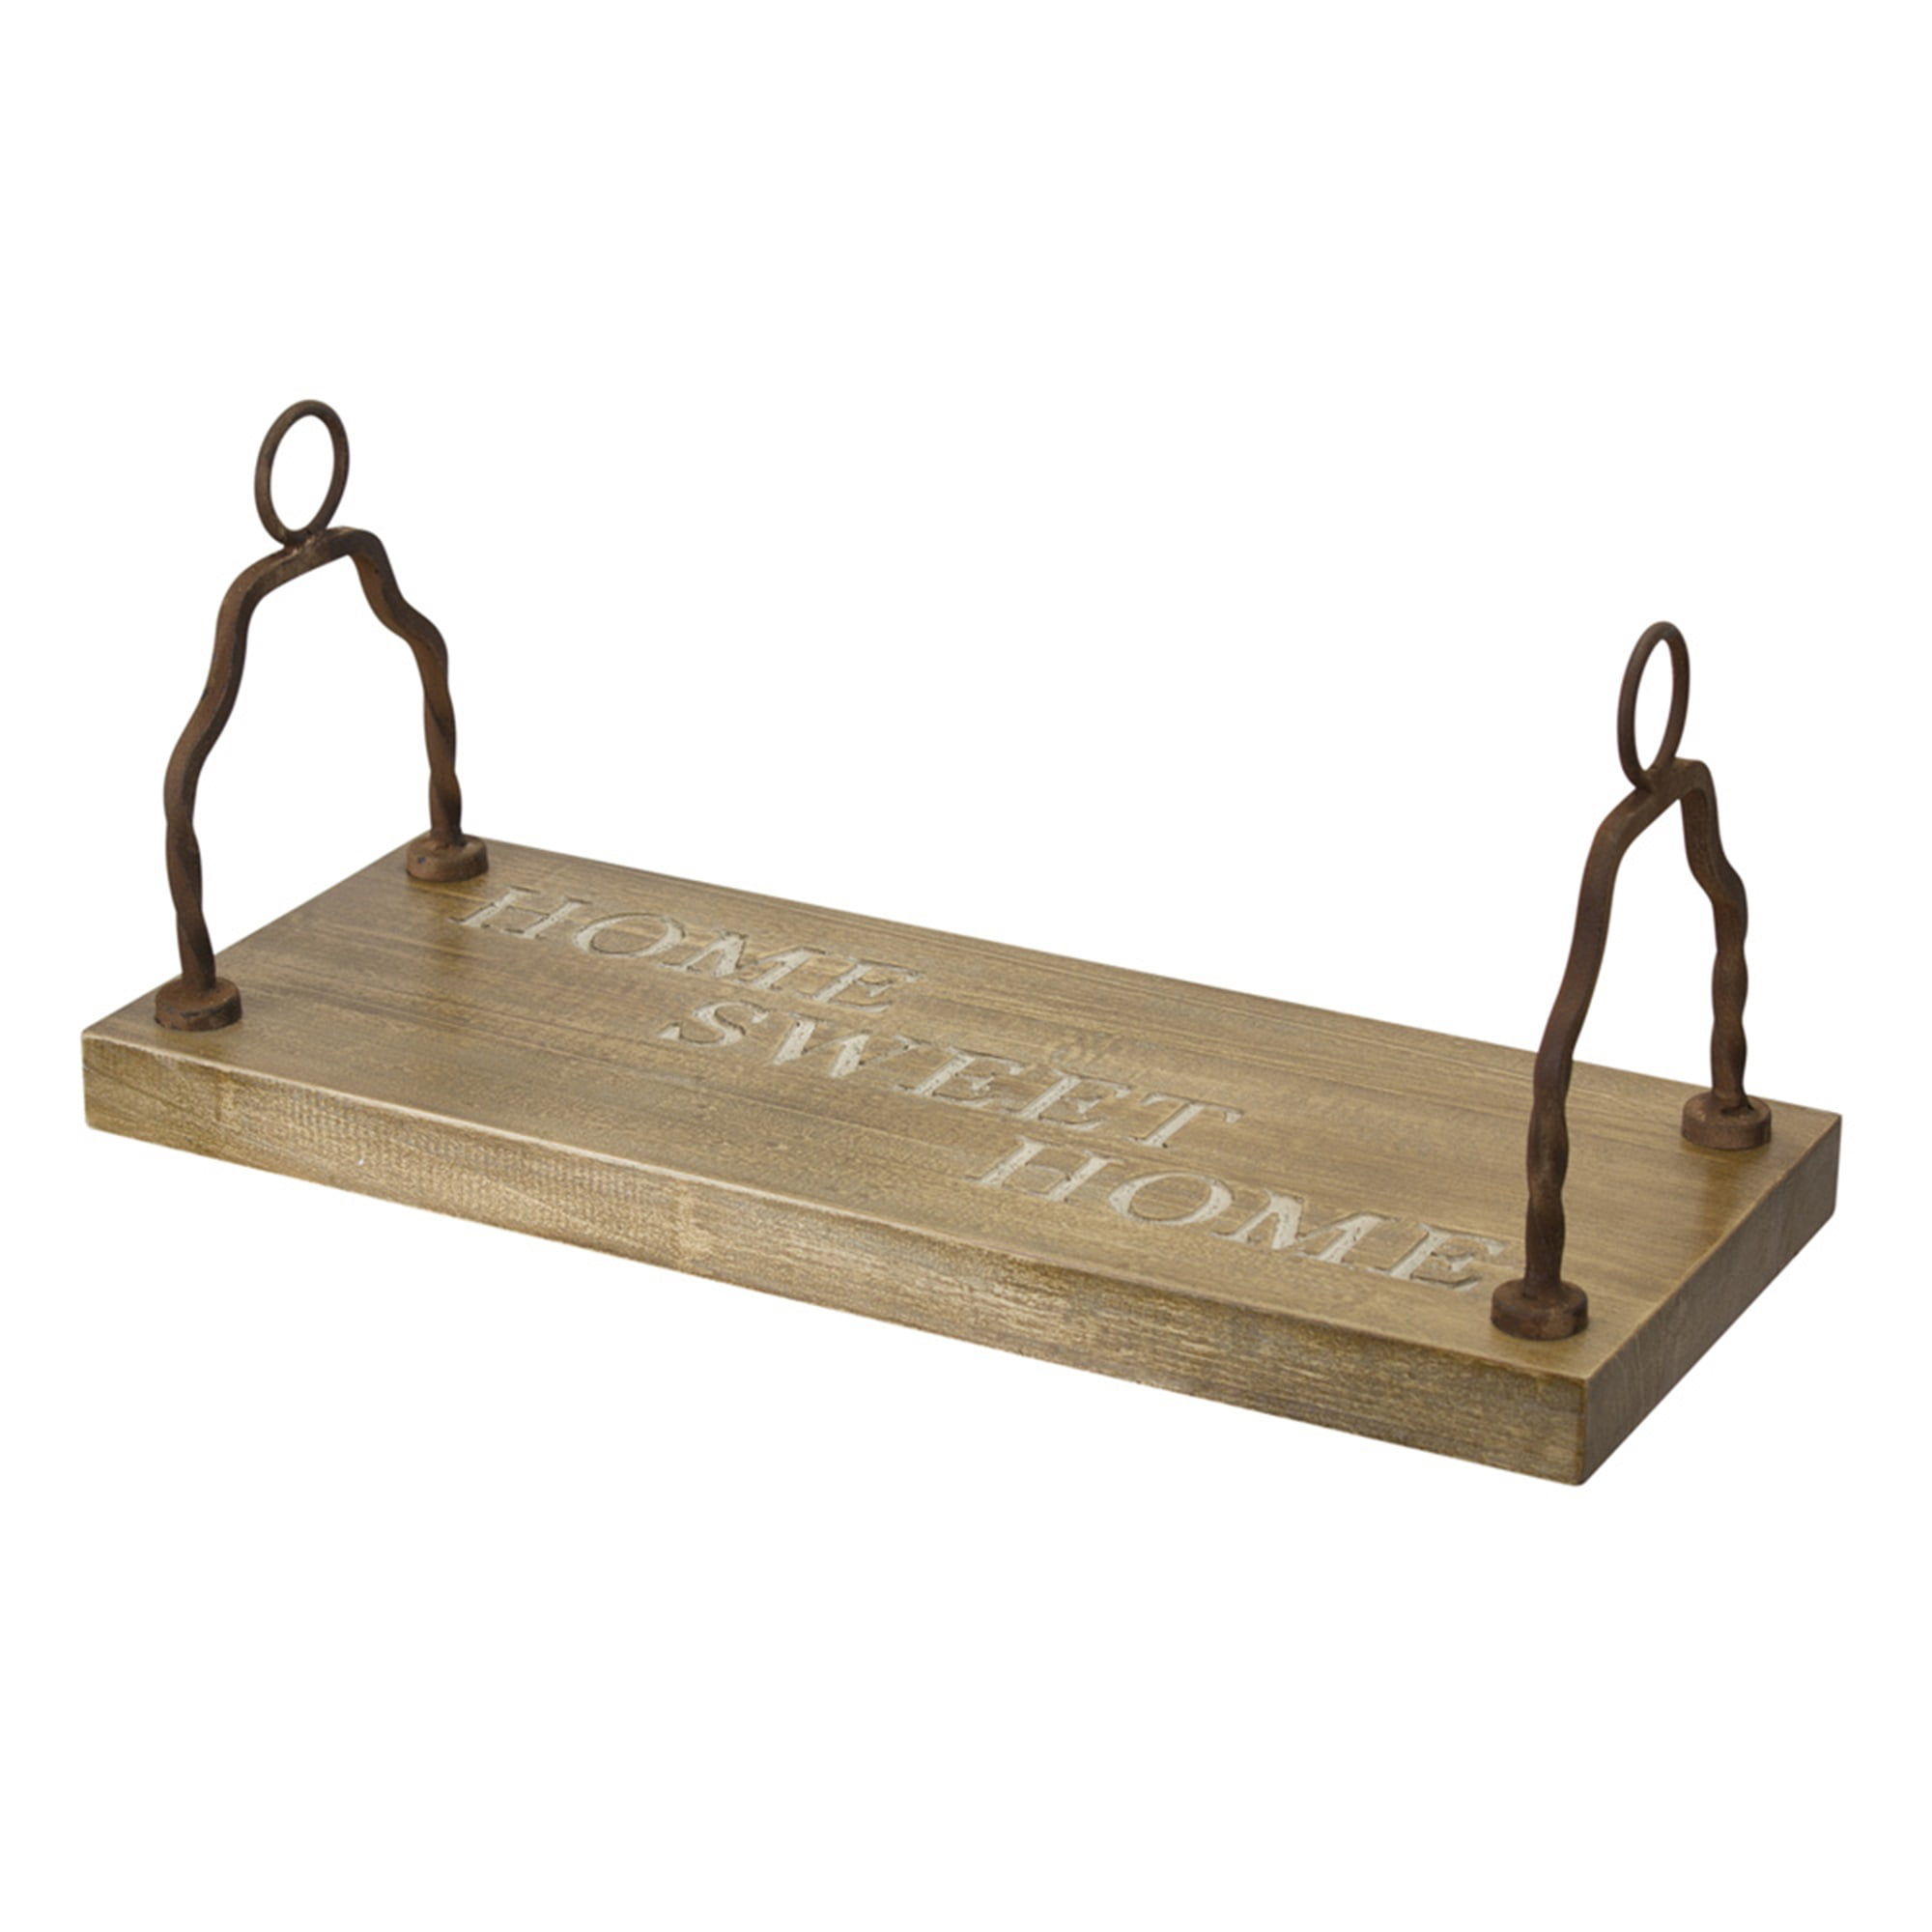 Home Sweet Home Swing (Rope Not Included) 23.5"L Wood/Iron